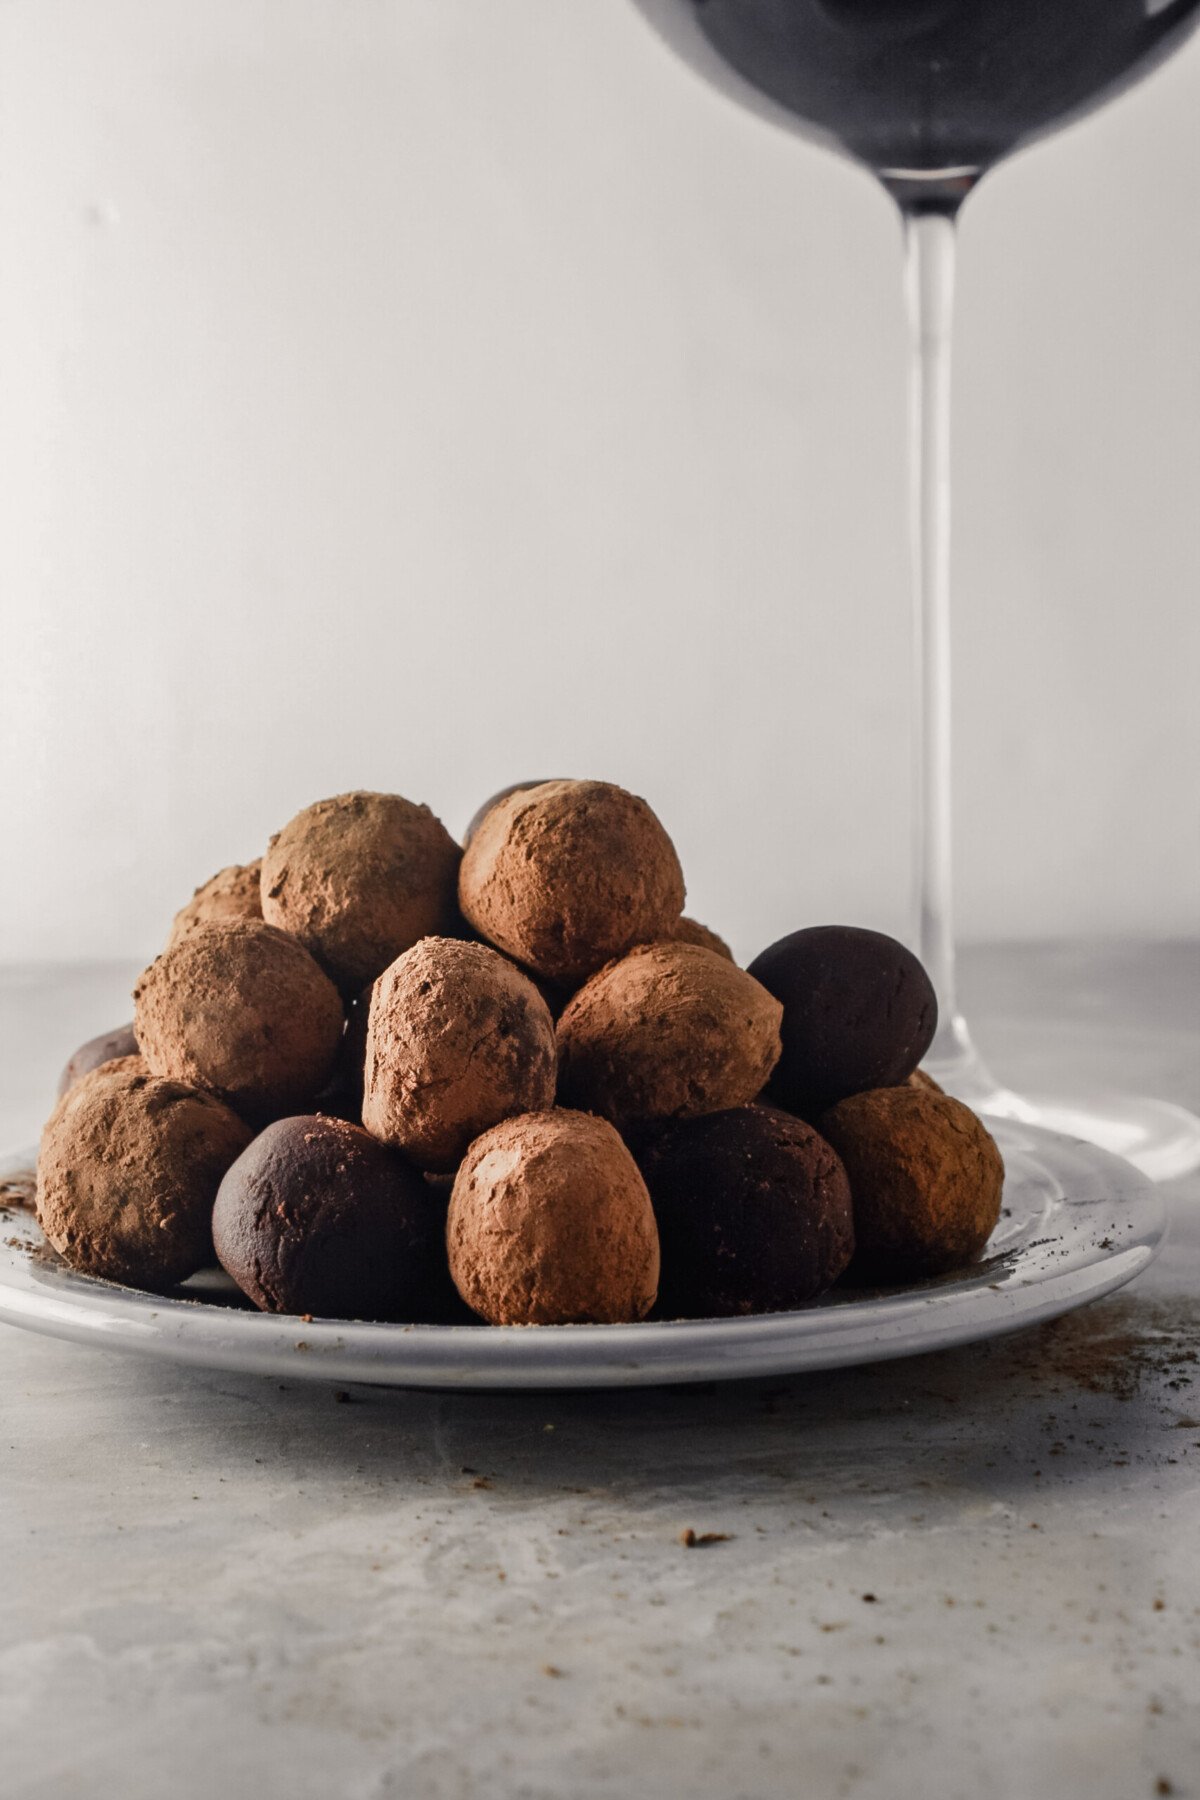 Photograph of dark chocolate truffles stacked on top of a gray plate